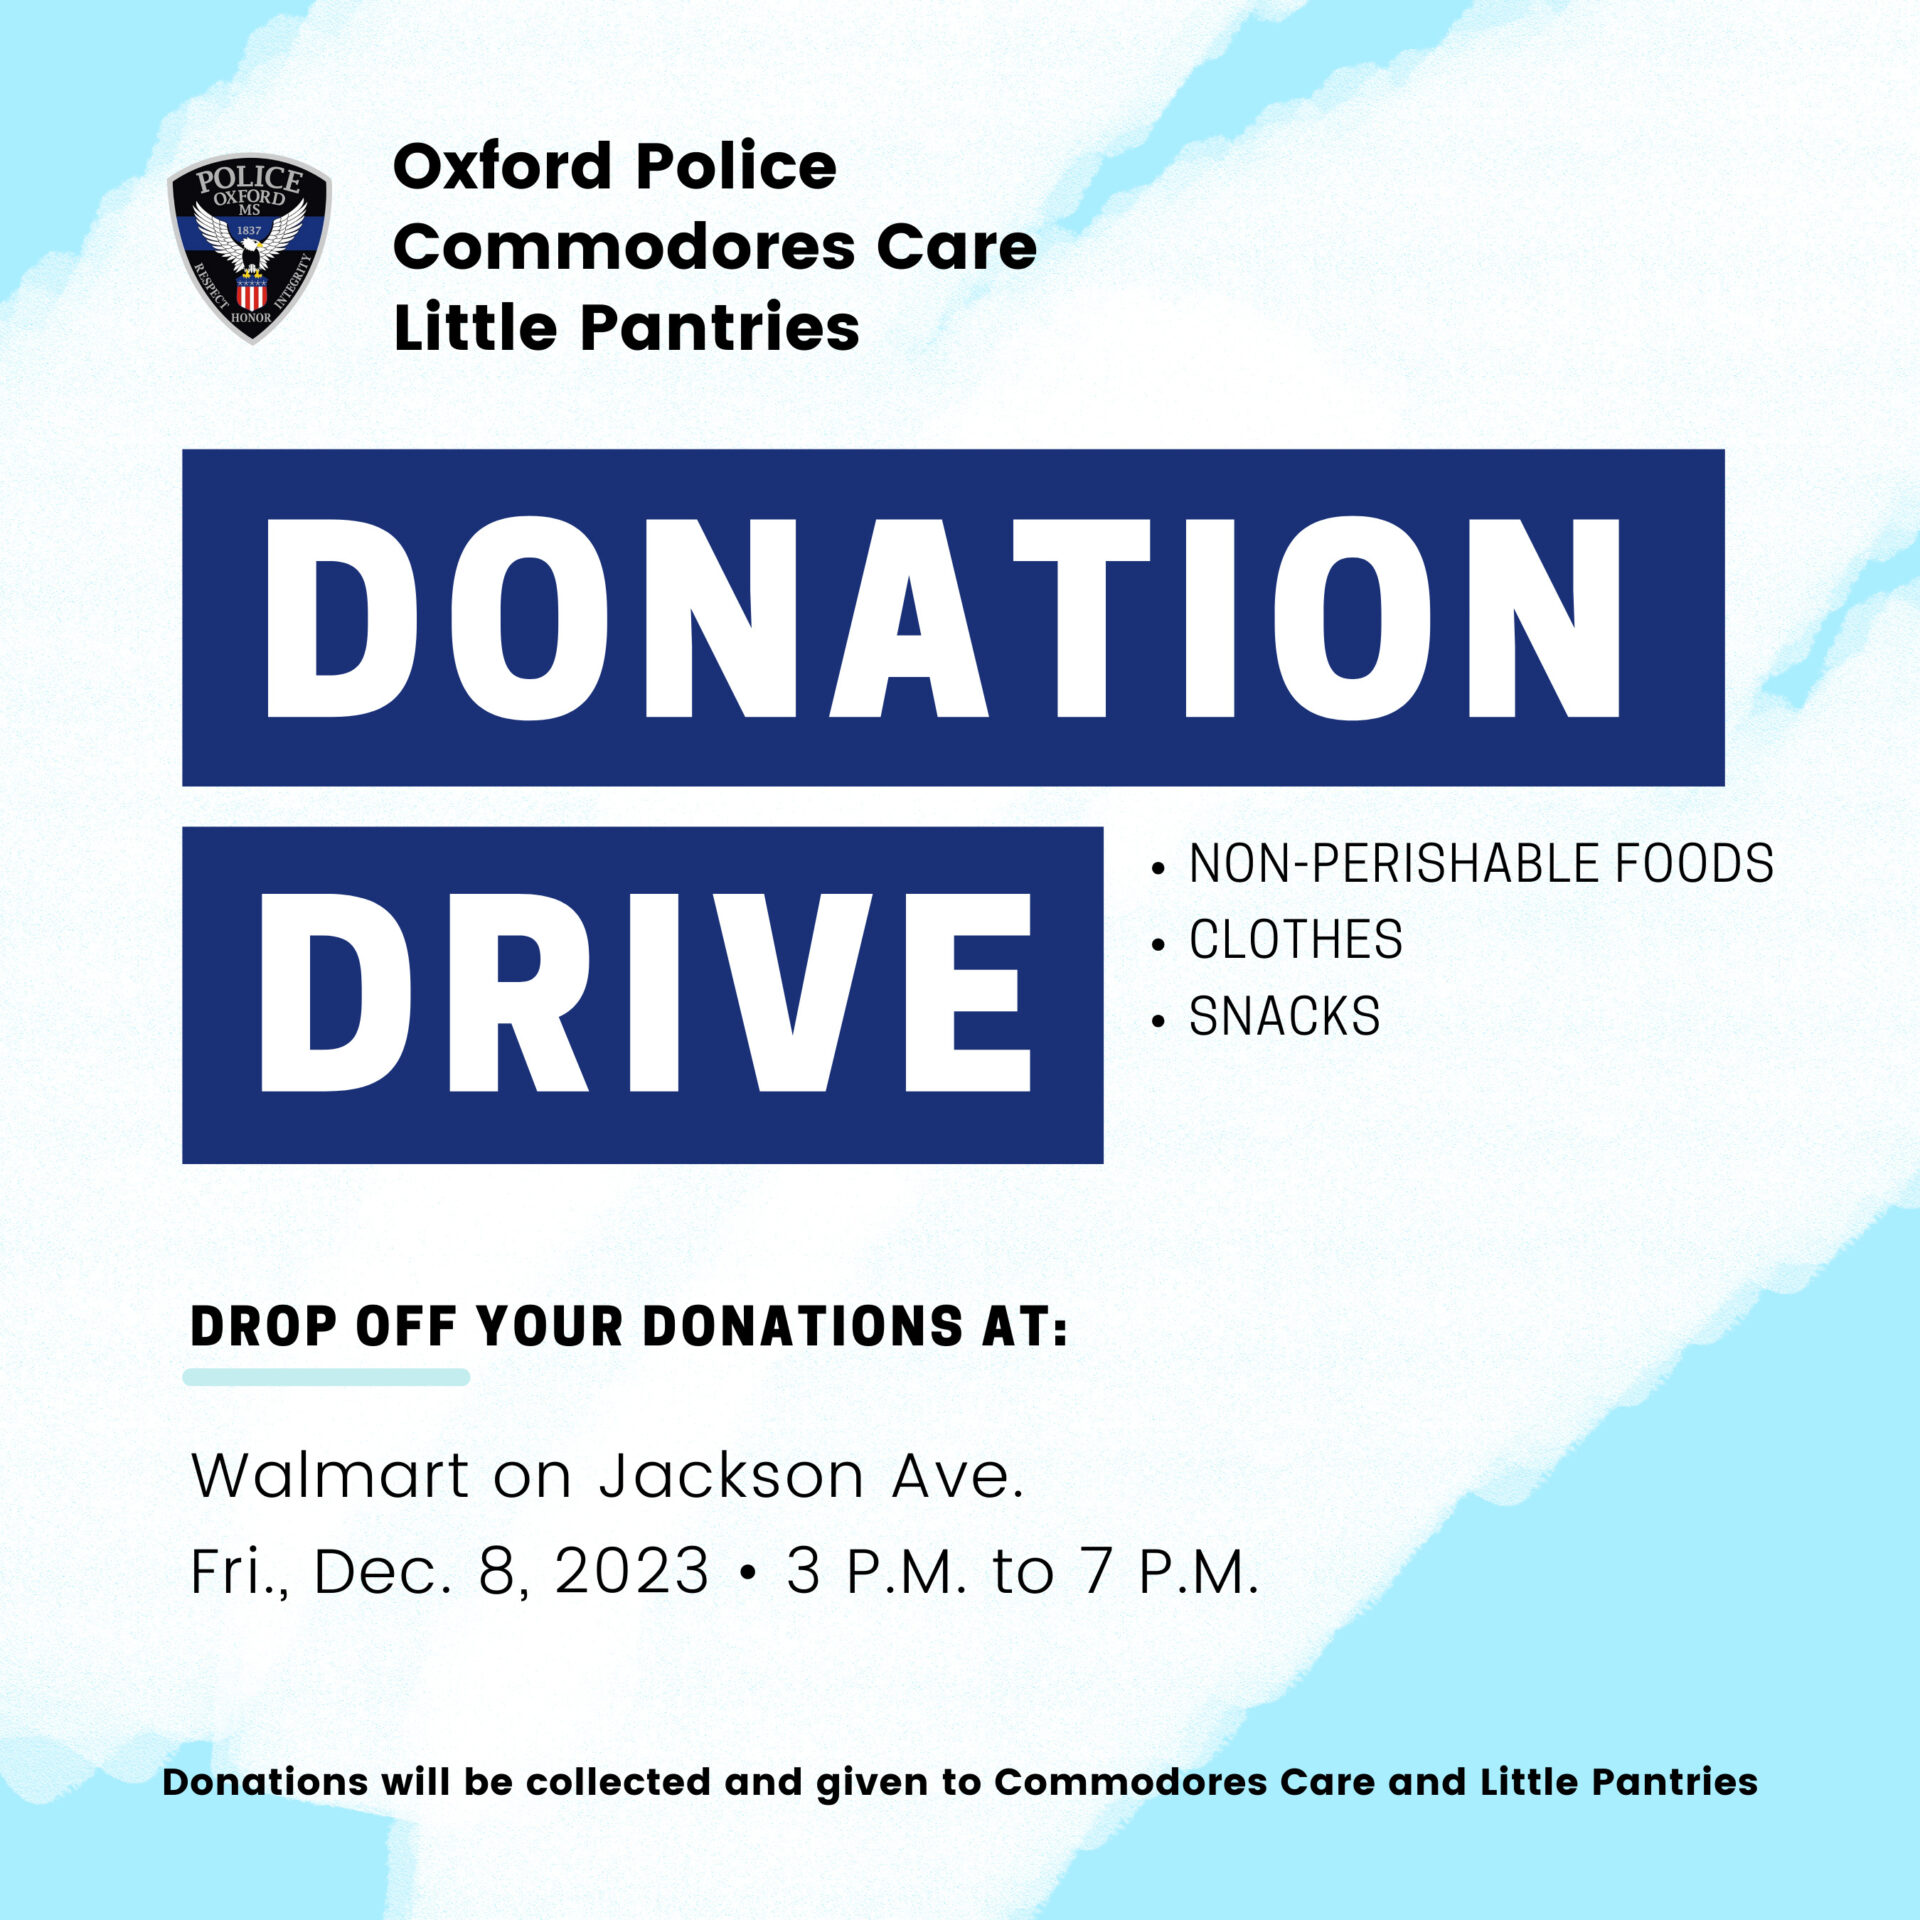 OPD Collecting Donations for Commodores Care, Little Pantries on Friday 